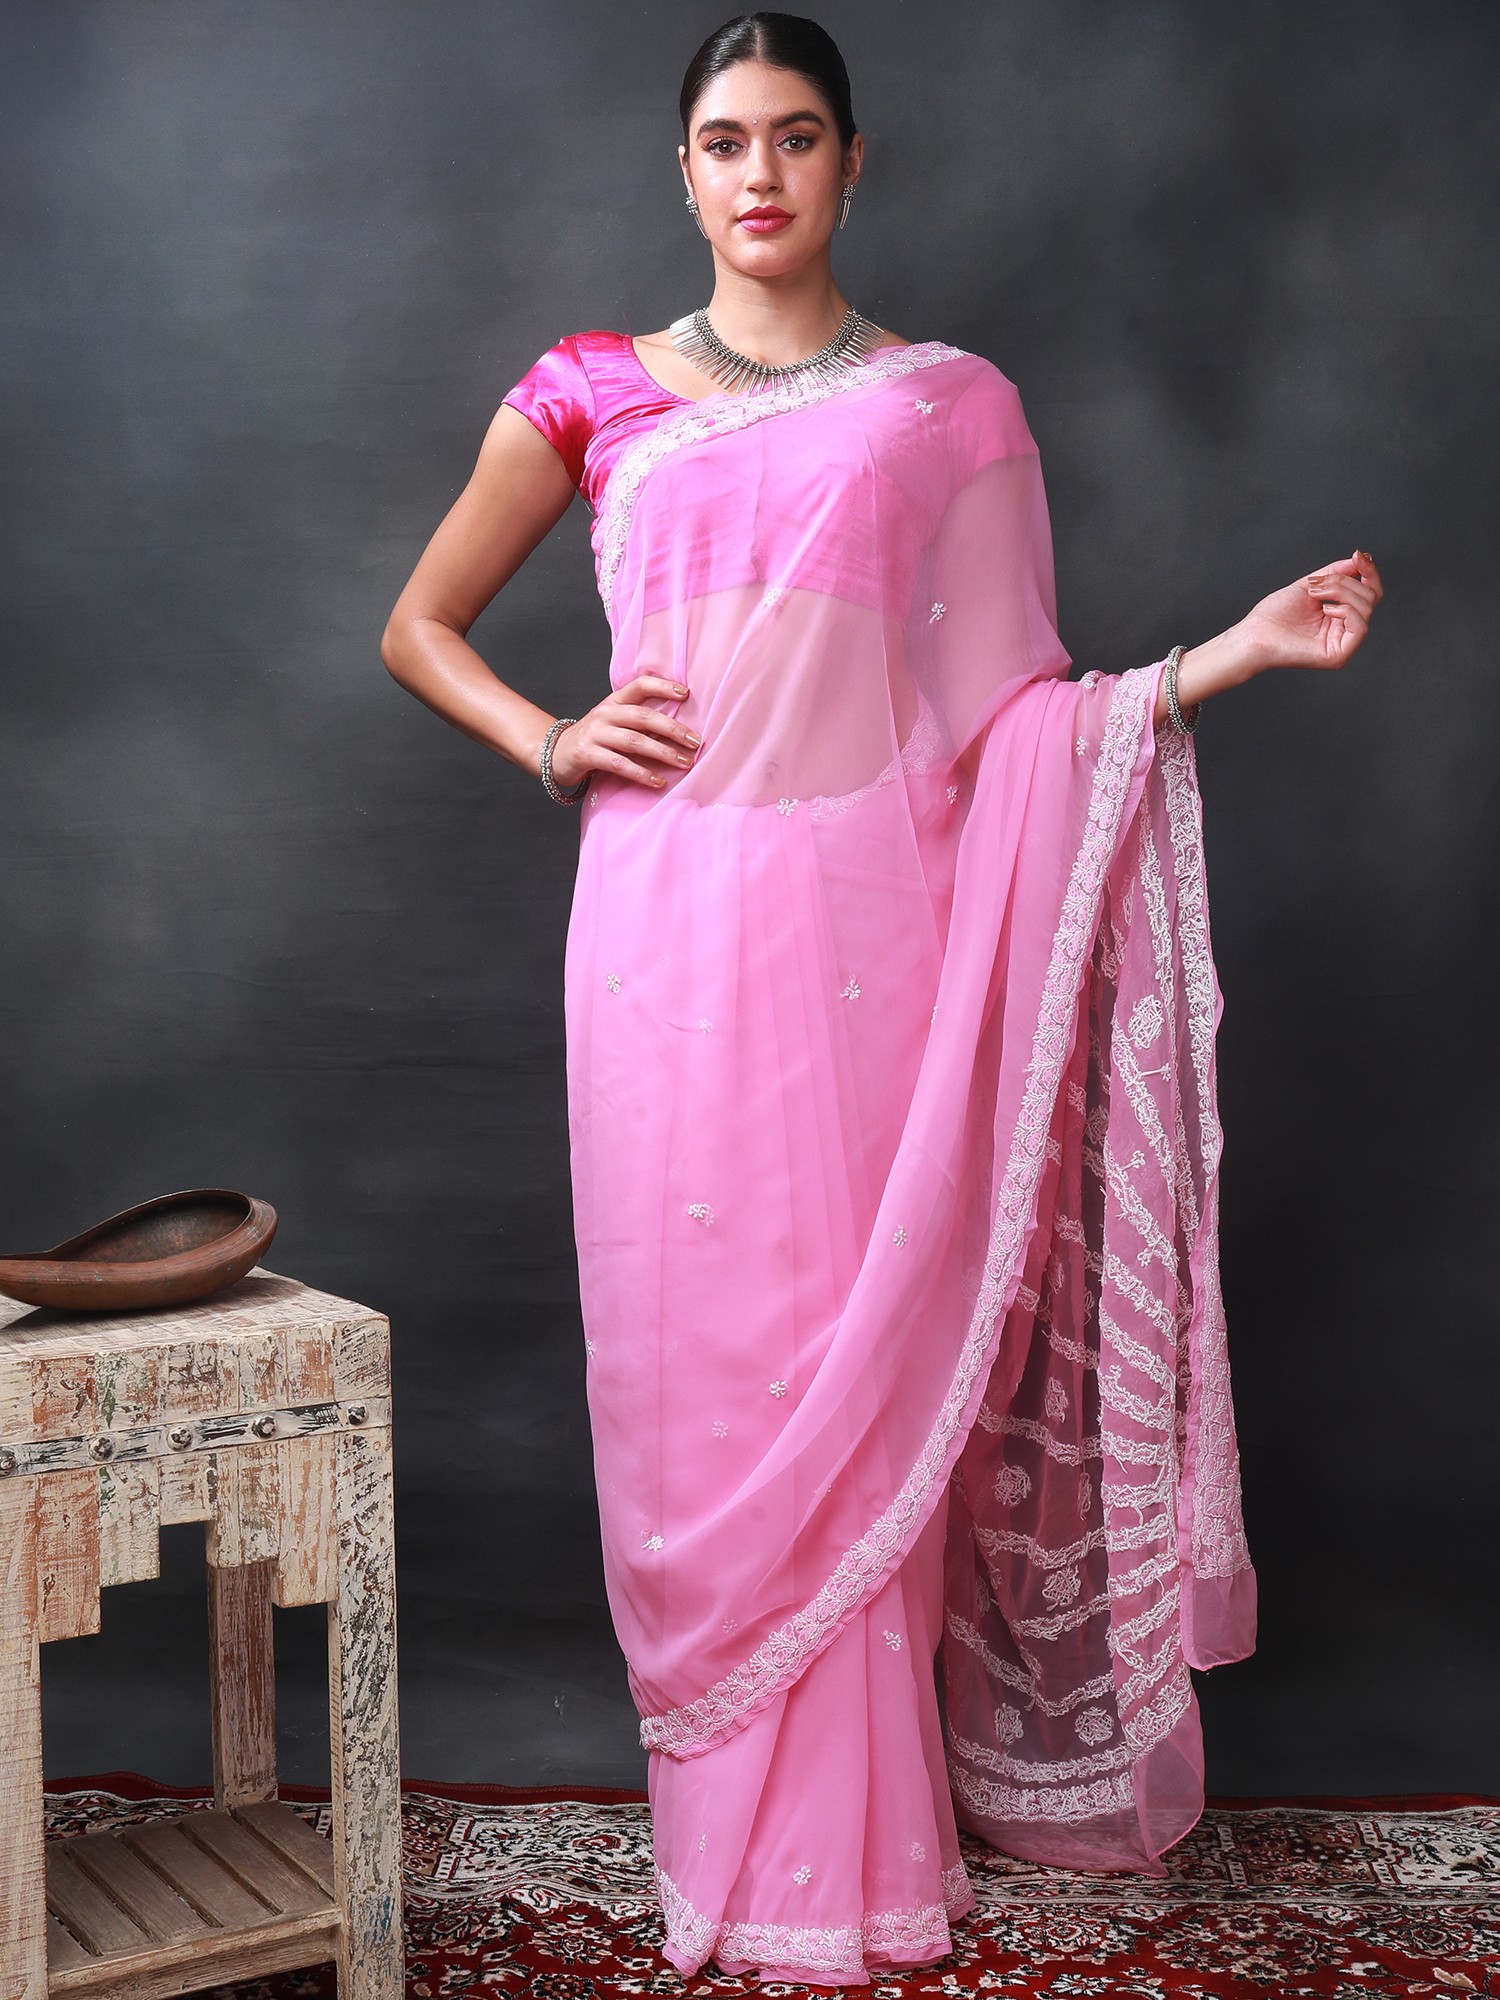 Candy-Pink Lukhnawi Chikankari Sari with Hand-Embroidered Flowers on ...